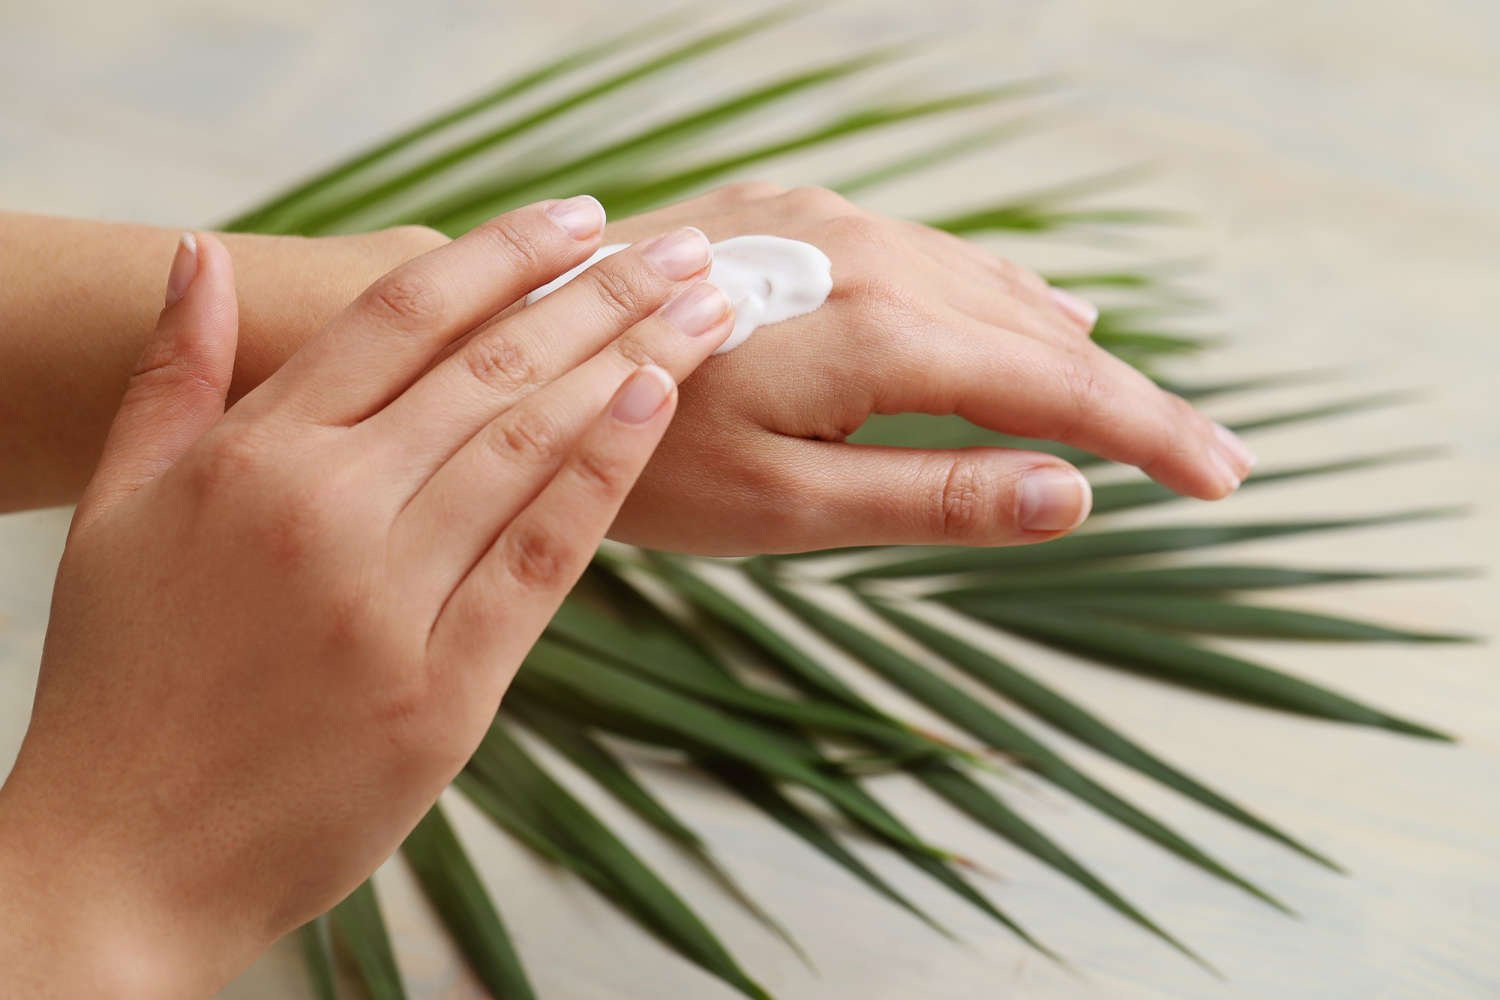 Choosing the Right Moisturizer for Your Skin Type